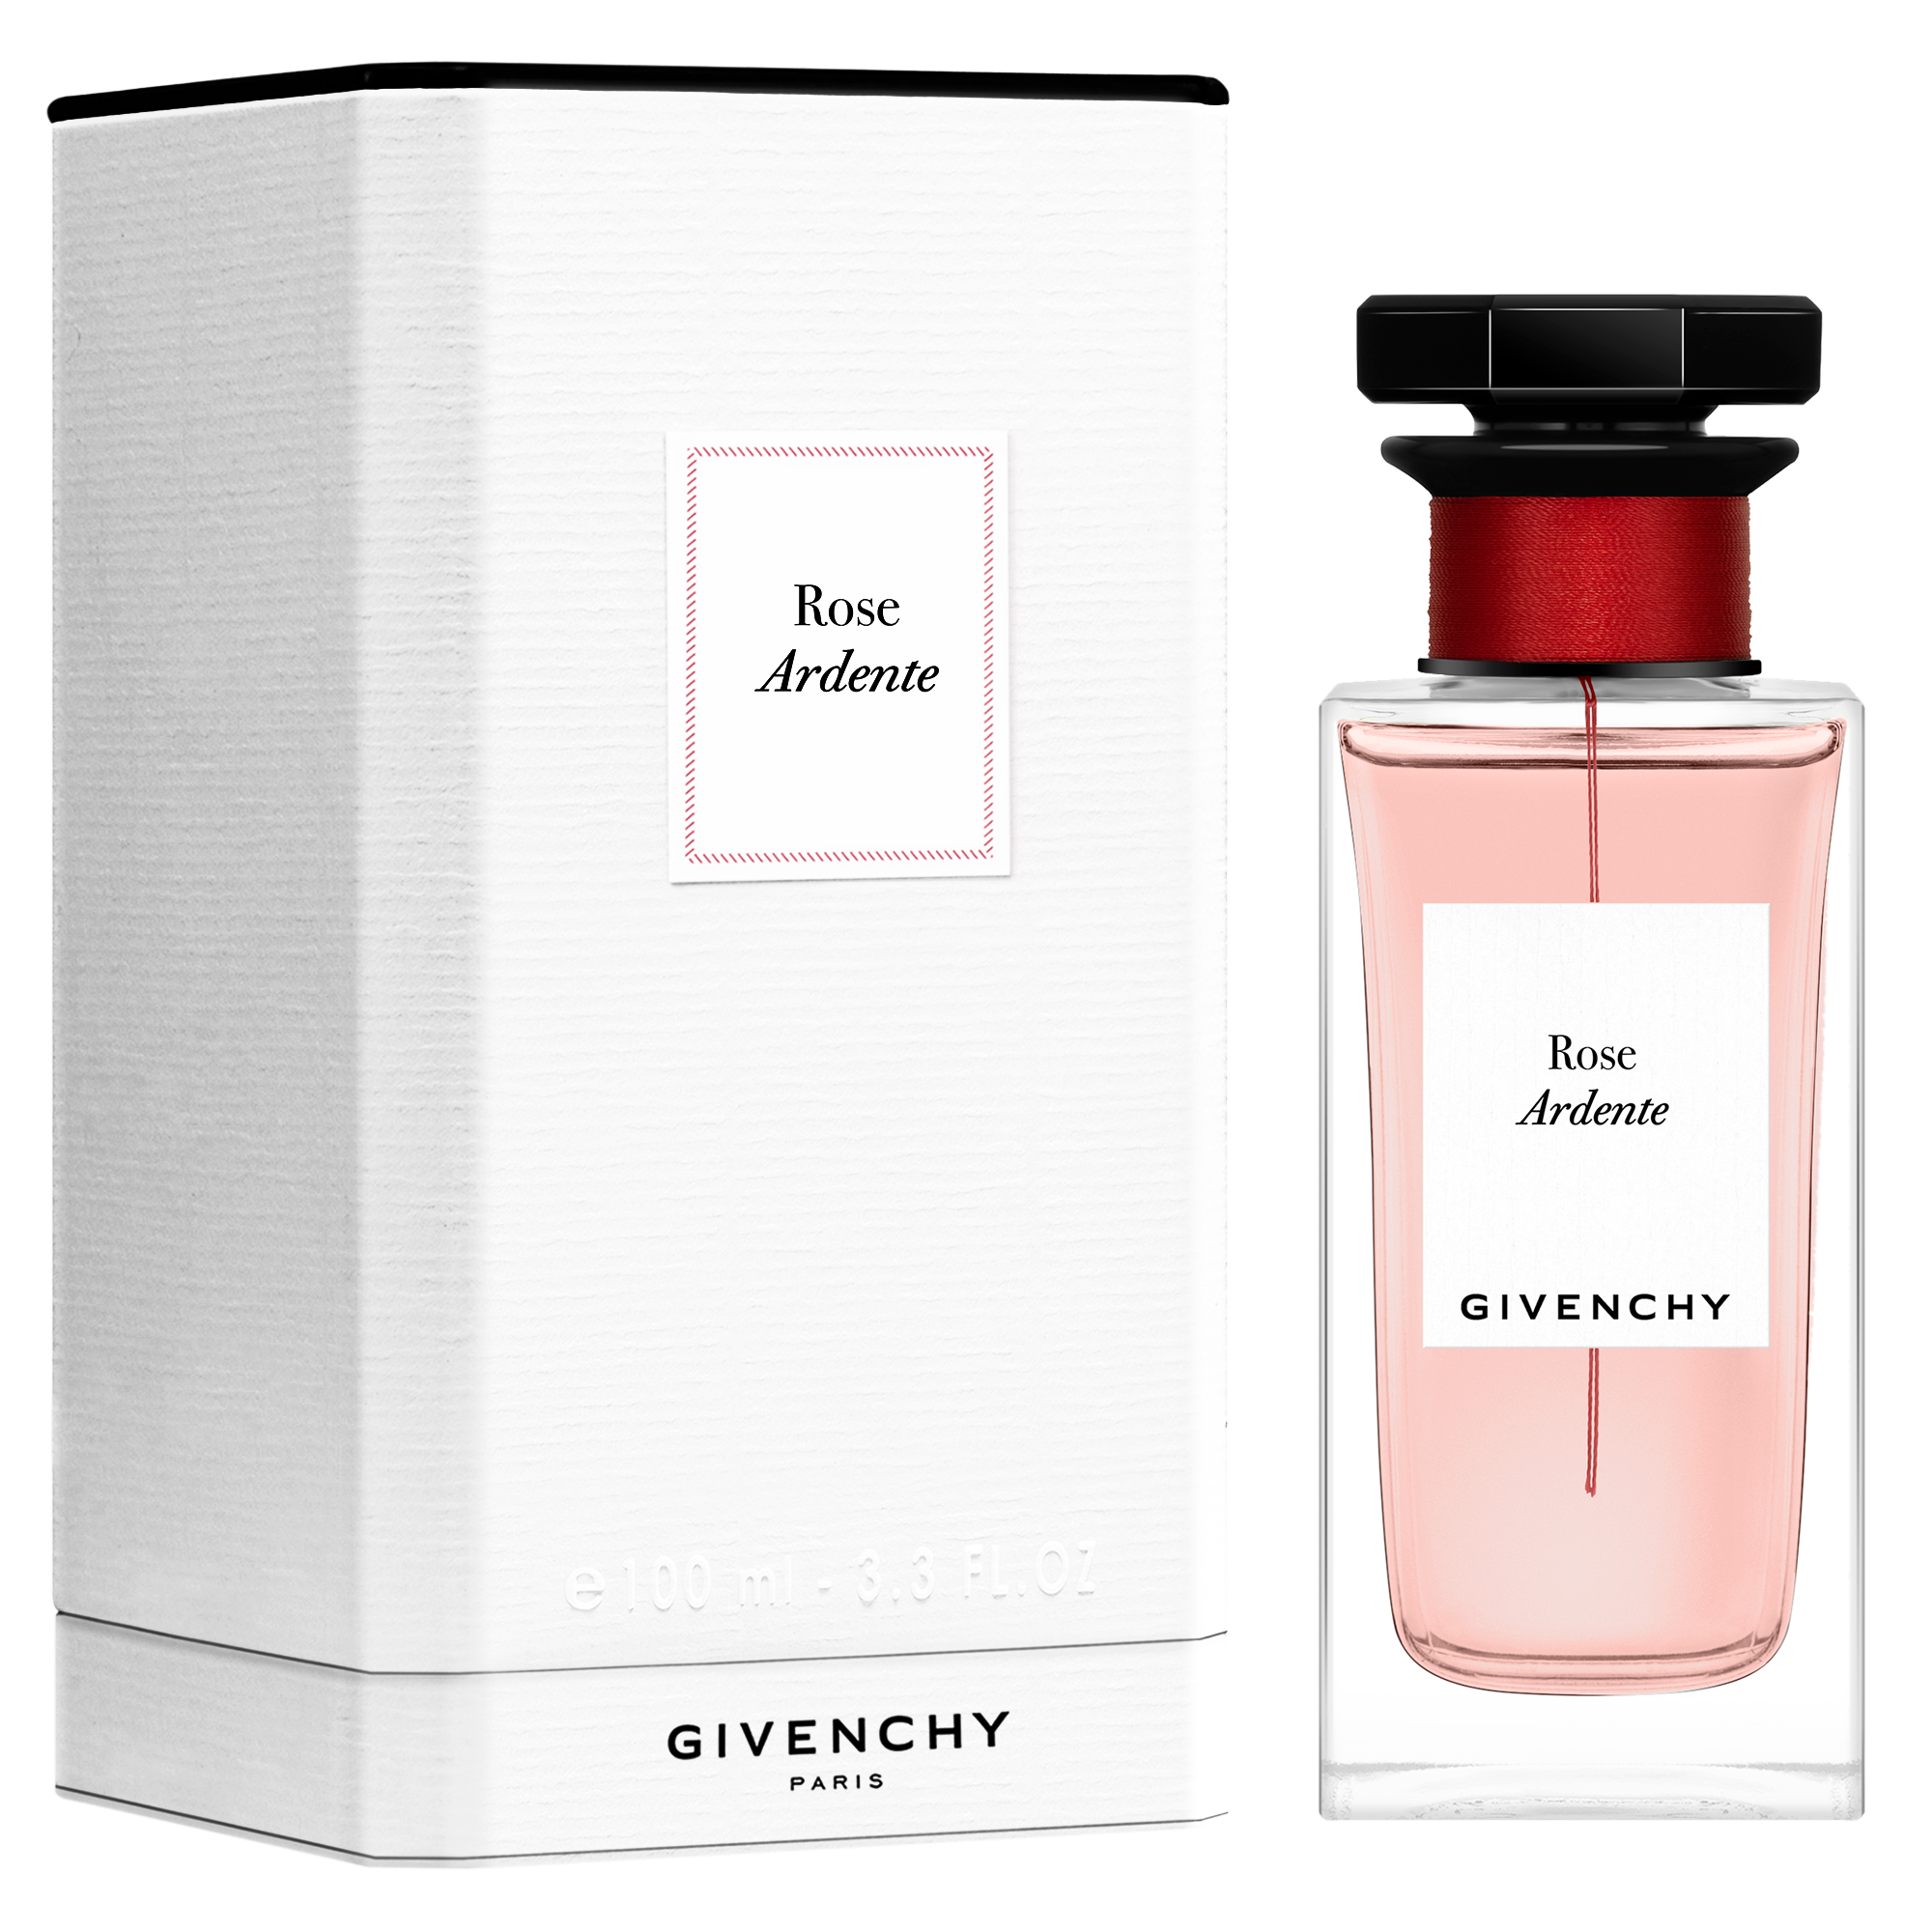 rose ardente givenchy price